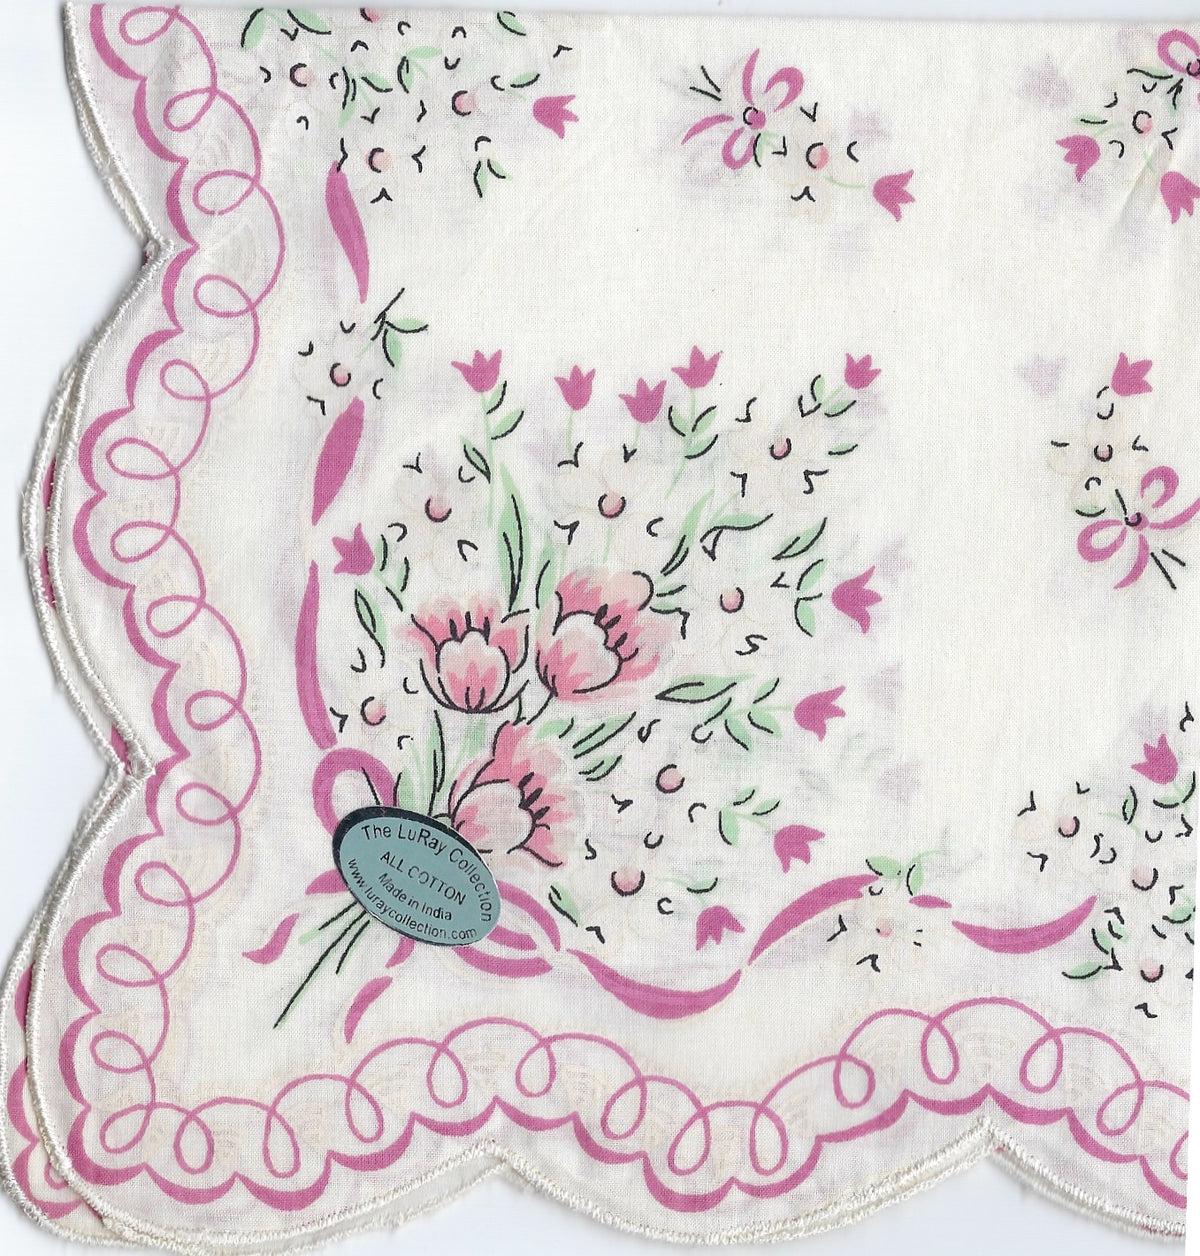 Vintage-Inspired Hanky -  Pink Flowers with Swirly Border Hanky